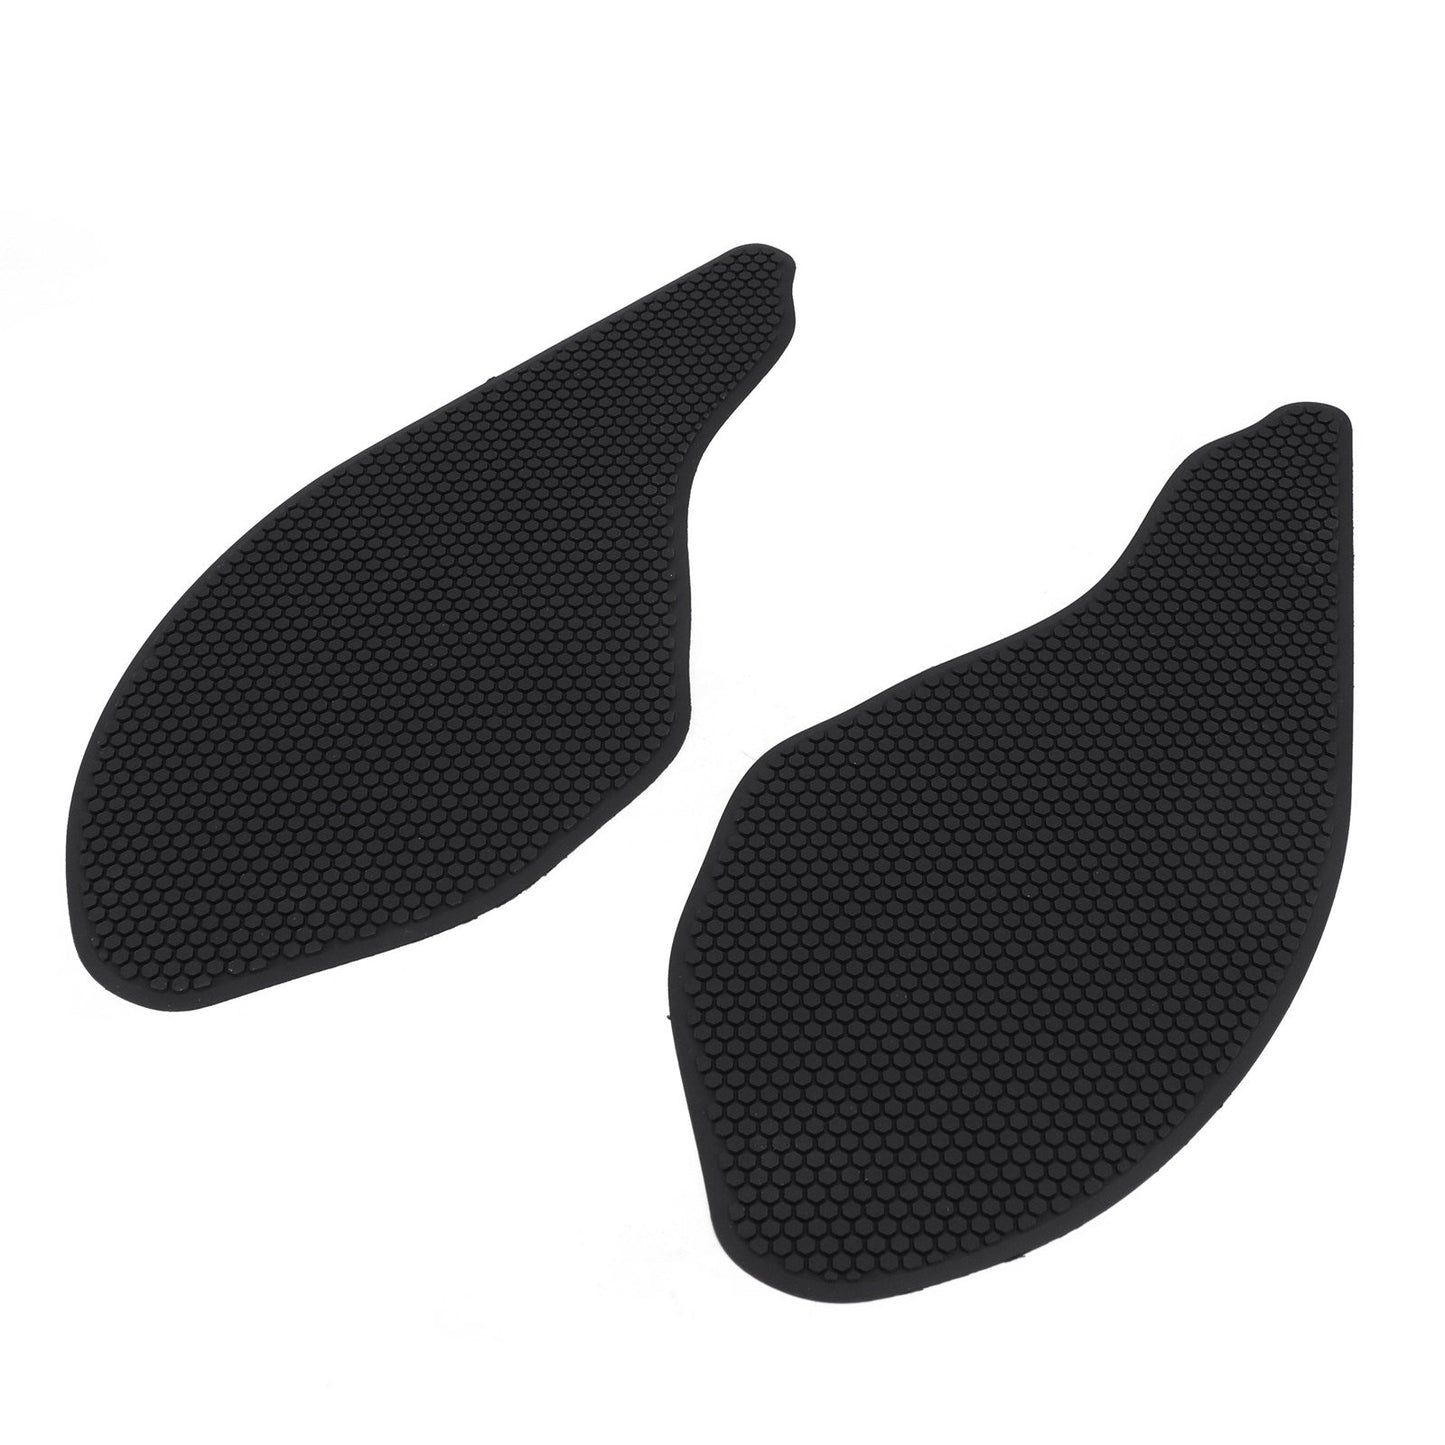 2X Side Tank Traction Grips Pads Fit For Triumph Daytona 675 2013/2016 Rubber